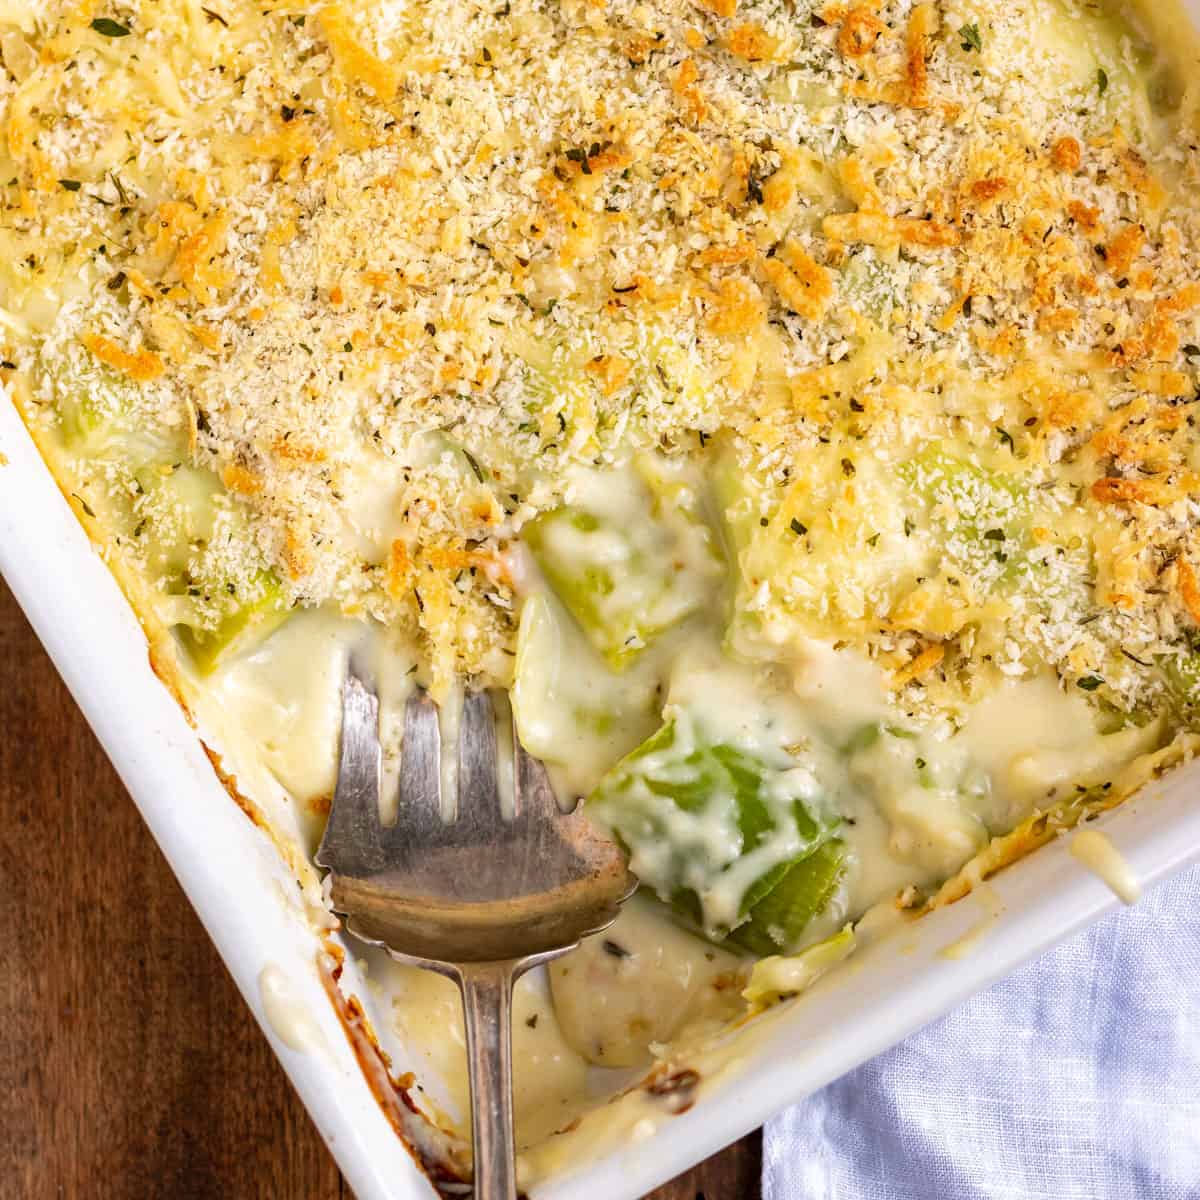 A baking dish of cheesy leeks gratin, with a serving spoon and a portion removed.